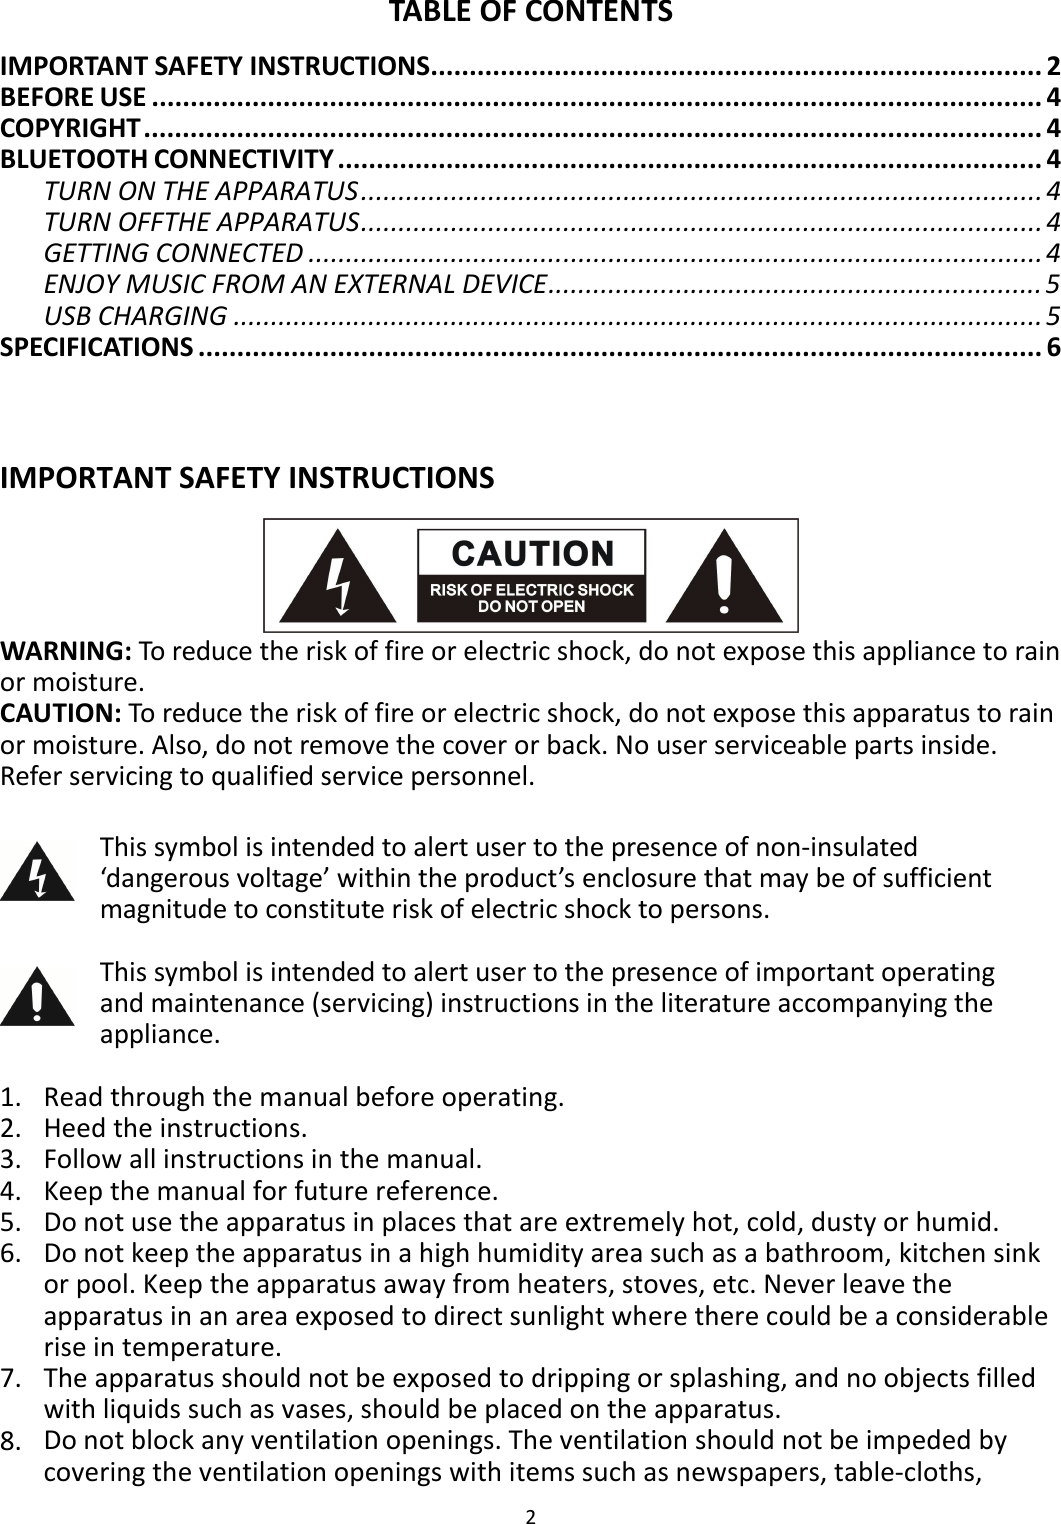 2  TABLE OF CONTENTS IMPORTANT SAFETY INSTRUCTIONS............................................................................... 2 BEFORE USE ................................................................................................................... 4 COPYRIGHT.................................................................................................................... 4 BLUETOOTH CONNECTIVITY ........................................................................................... 4 TURN ON THE APPARATUS........................................................................................... 4 TURN OFFTHE APPARATUS........................................................................................... 4 GETTING CONNECTED .................................................................................................. 4 ENJOY MUSIC FROM AN EXTERNAL DEVICE.................................................................. 5 USB CHARGING ............................................................................................................ 5 SPECIFICATIONS ............................................................................................................. 6   IMPORTANT SAFETY INSTRUCTIONS  WARNING: To reduce the risk of fire or electric shock, do not expose this appliance to rain or moisture.   CAUTION: To reduce the risk of fire or electric shock, do not expose this apparatus to rain or moisture. Also, do not remove the cover or back. No user serviceable parts inside. Refer servicing to qualified service personnel.   This symbol is intended to alert user to the presence of non-insulated ‘dangerous voltage’ within the product’s enclosure that may be of sufficient magnitude to constitute risk of electric shock to persons.   This symbol is intended to alert user to the presence of important operating and maintenance (servicing) instructions in the literature accompanying the appliance.  1. Read through the manual before operating. 2. Heed the instructions. 3. Follow all instructions in the manual. 4. Keep the manual for future reference. 5. Do not use the apparatus in places that are extremely hot, cold, dusty or humid. 6. Do not keep the apparatus in a high humidity area such as a bathroom, kitchen sink or pool. Keep the apparatus away from heaters, stoves, etc. Never leave the apparatus in an area exposed to direct sunlight where there could be a considerable rise in temperature. 7. The apparatus should not be exposed to dripping or splashing, and no objects filled with liquids such as vases, should be placed on the apparatus. 8. Do not block any ventilation openings. The ventilation should not be impeded by covering the ventilation openings with items such as newspapers, table-cloths, 